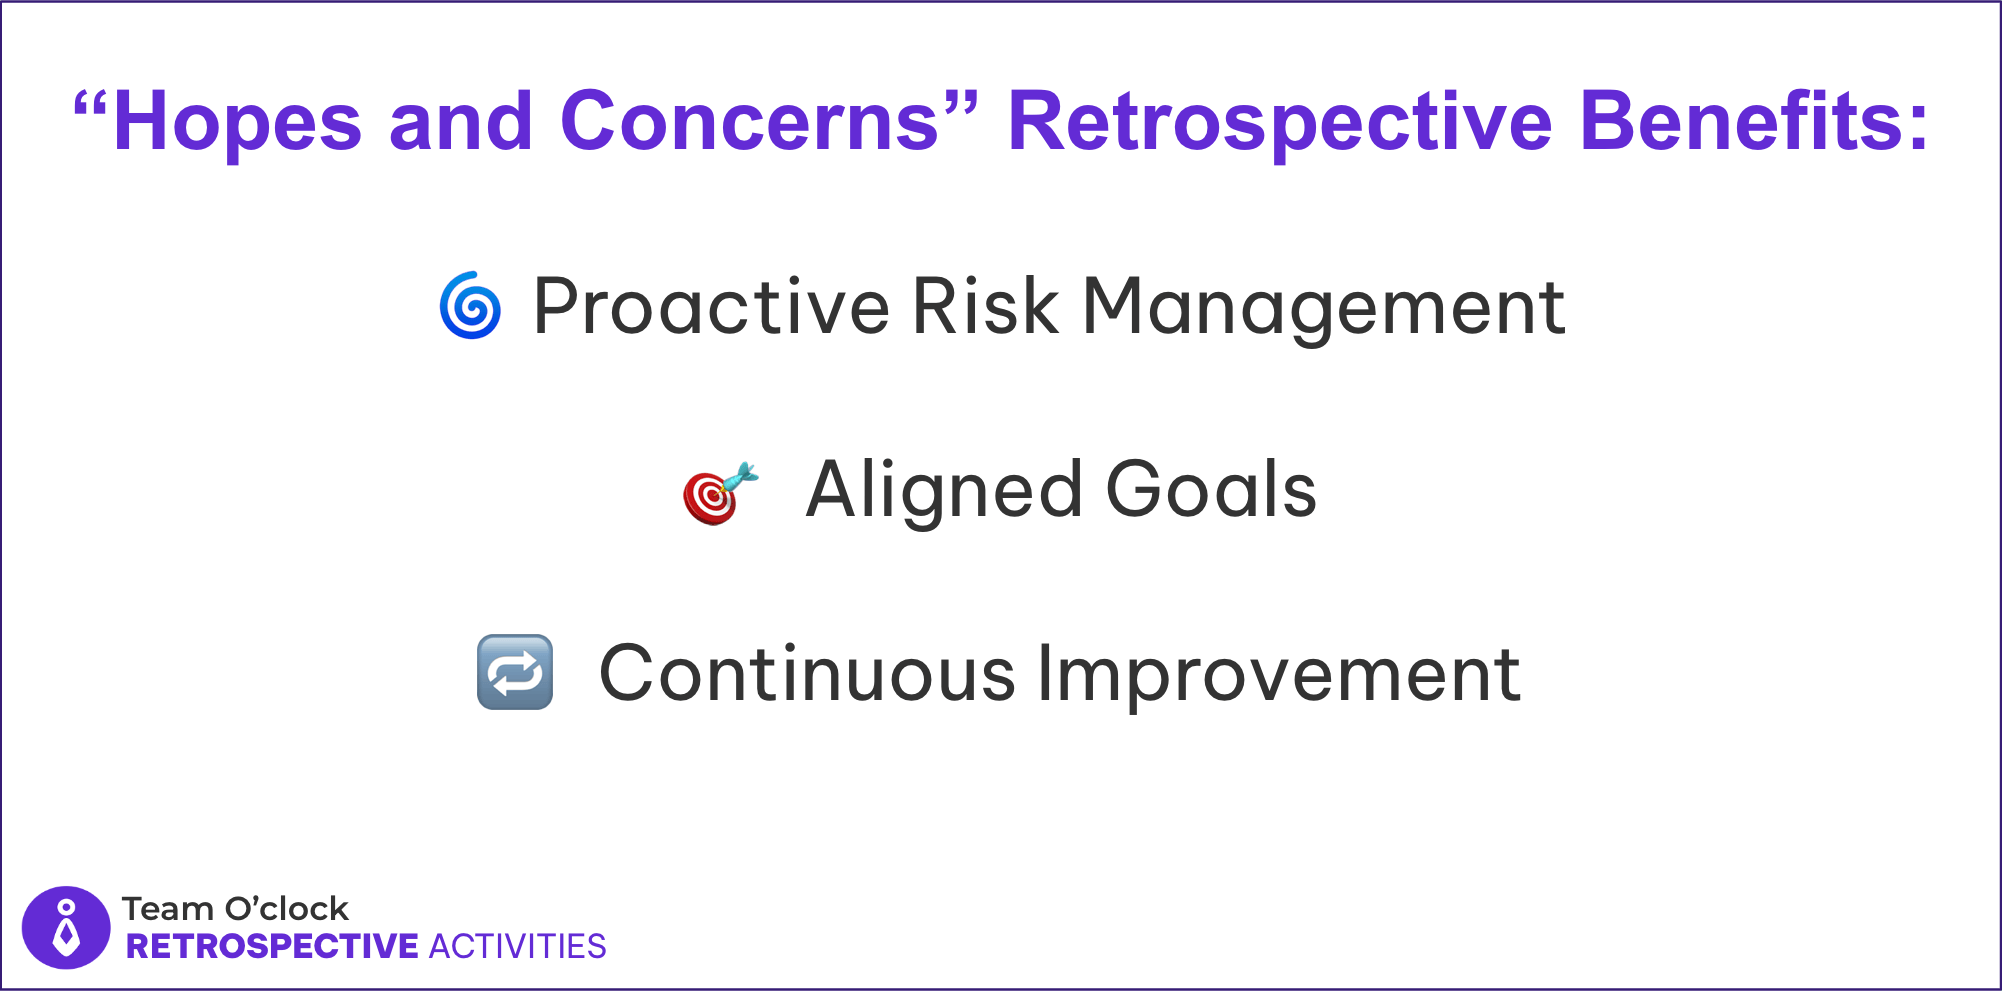 Visual for Hopes and Concerns activity benefits: 🌀 Proactive Risk Management , 🎯 Aligned Goals, 🔁 Continuous Improvement